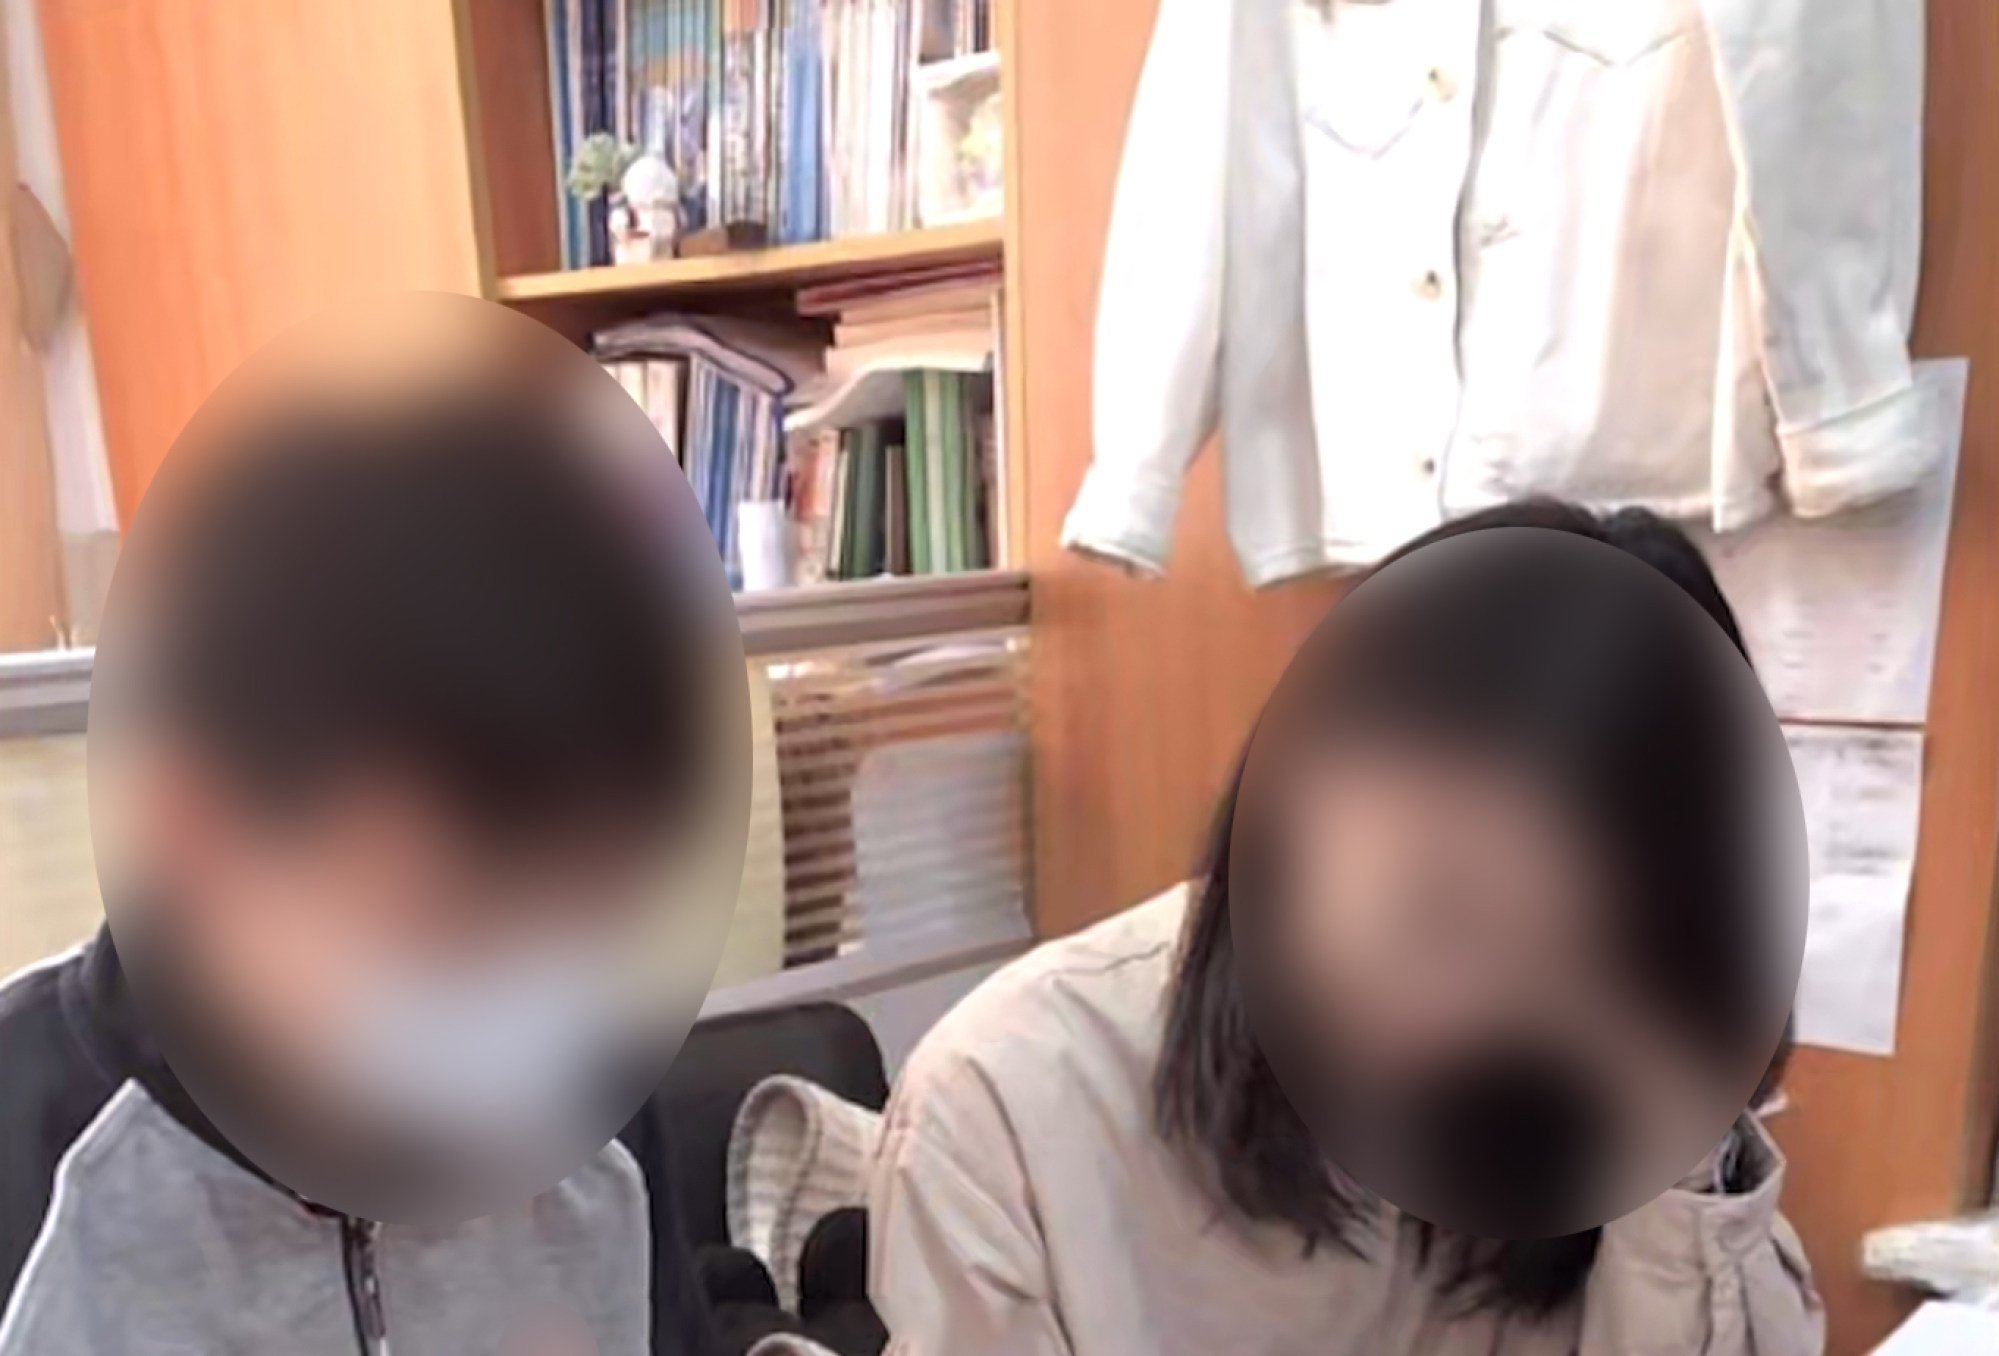 The teacher and pupil in a tutoring session together. She has been suspended from her job pending an investigation. Photo: Douyin